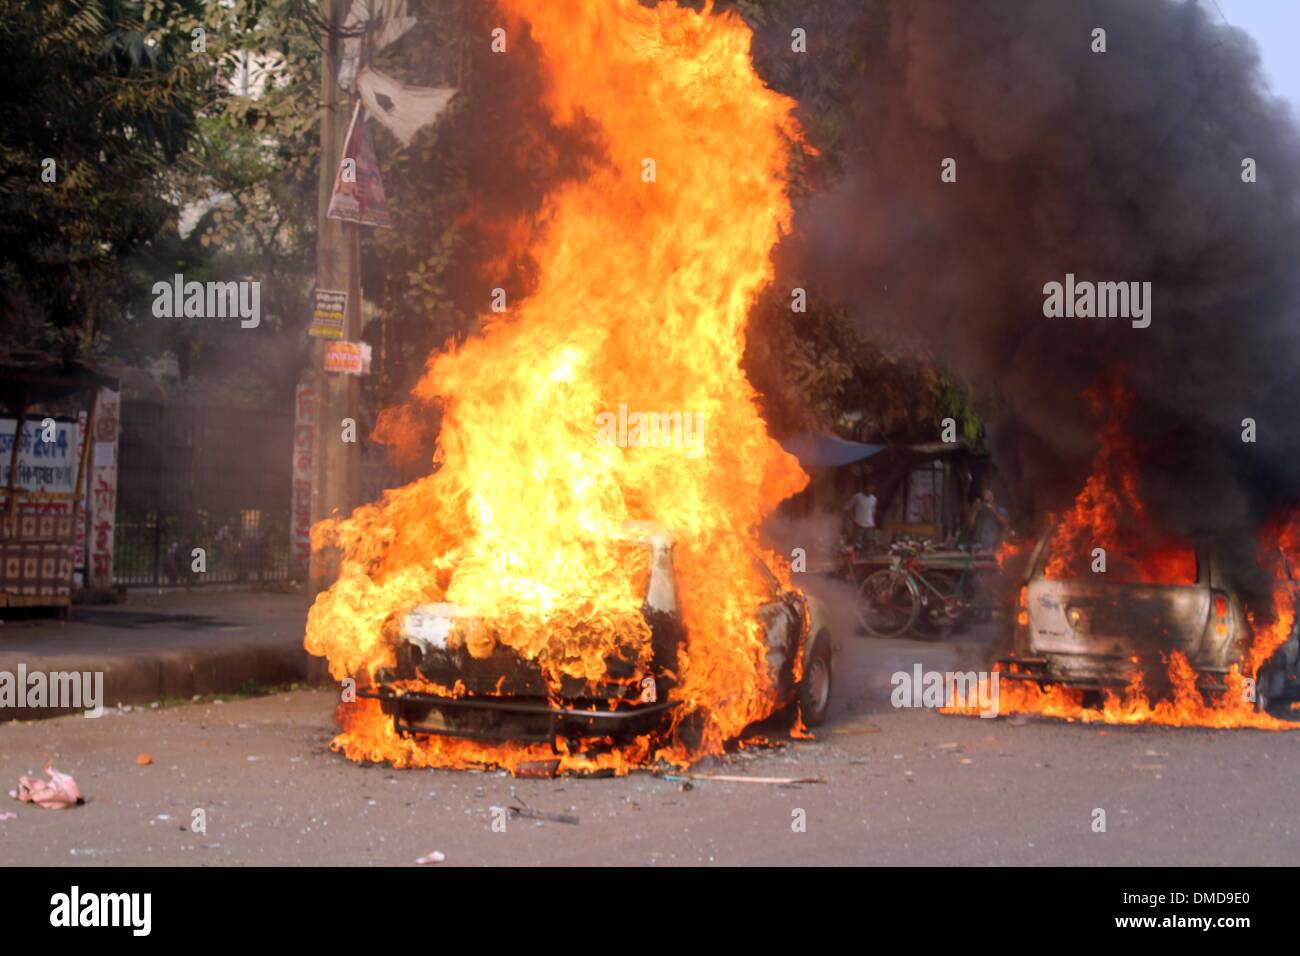 Dhaka, Bangladesh. 13th Dec, 2013. A car is set on fire by activists of Jamaat-e-Islami Party as they protest against the execution of their leader Abdul Quader Molla in Dhaka, Bangladesh, Dec. 13, 2013. Bangladesh has executed Abdul Quader Molla, an Islamist party leader convicted of war crimes in 1971, which is the first execution of a war criminal in the country. In protest against Molla's execution, his party Jamaat called countrywide dawn-to-dusk general strike for Sunday. Credit:  Shariful Islam/Xinhua/Alamy Live News Stock Photo